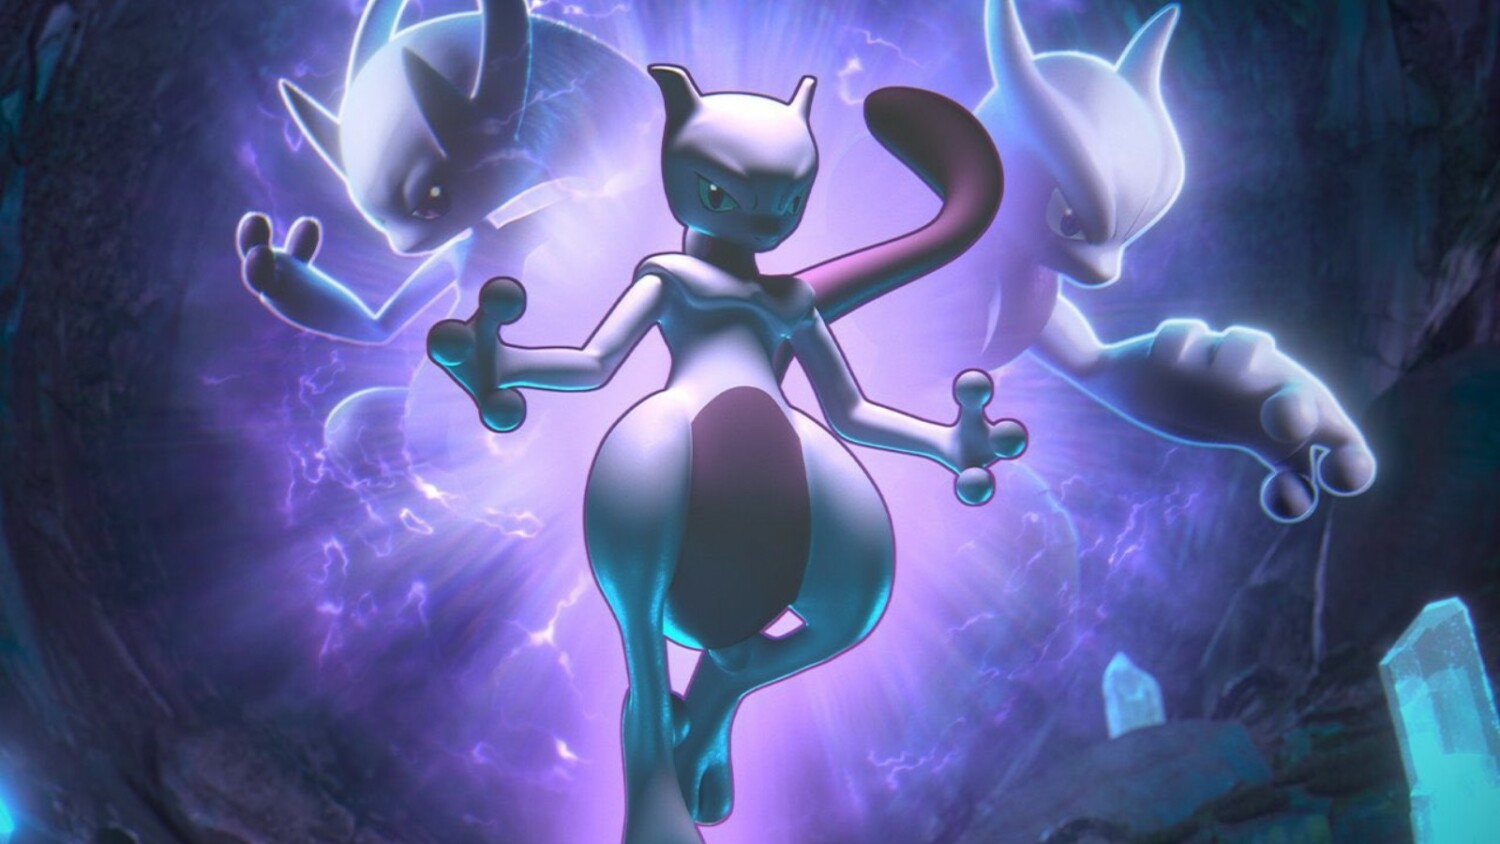 This news is just TWO good! 🤩⁣ ⁣ Mewtwo arrives to Pokémon UNITE on July  21 to celebrate the game's second anniversary!⁣ ⁣ The fan…